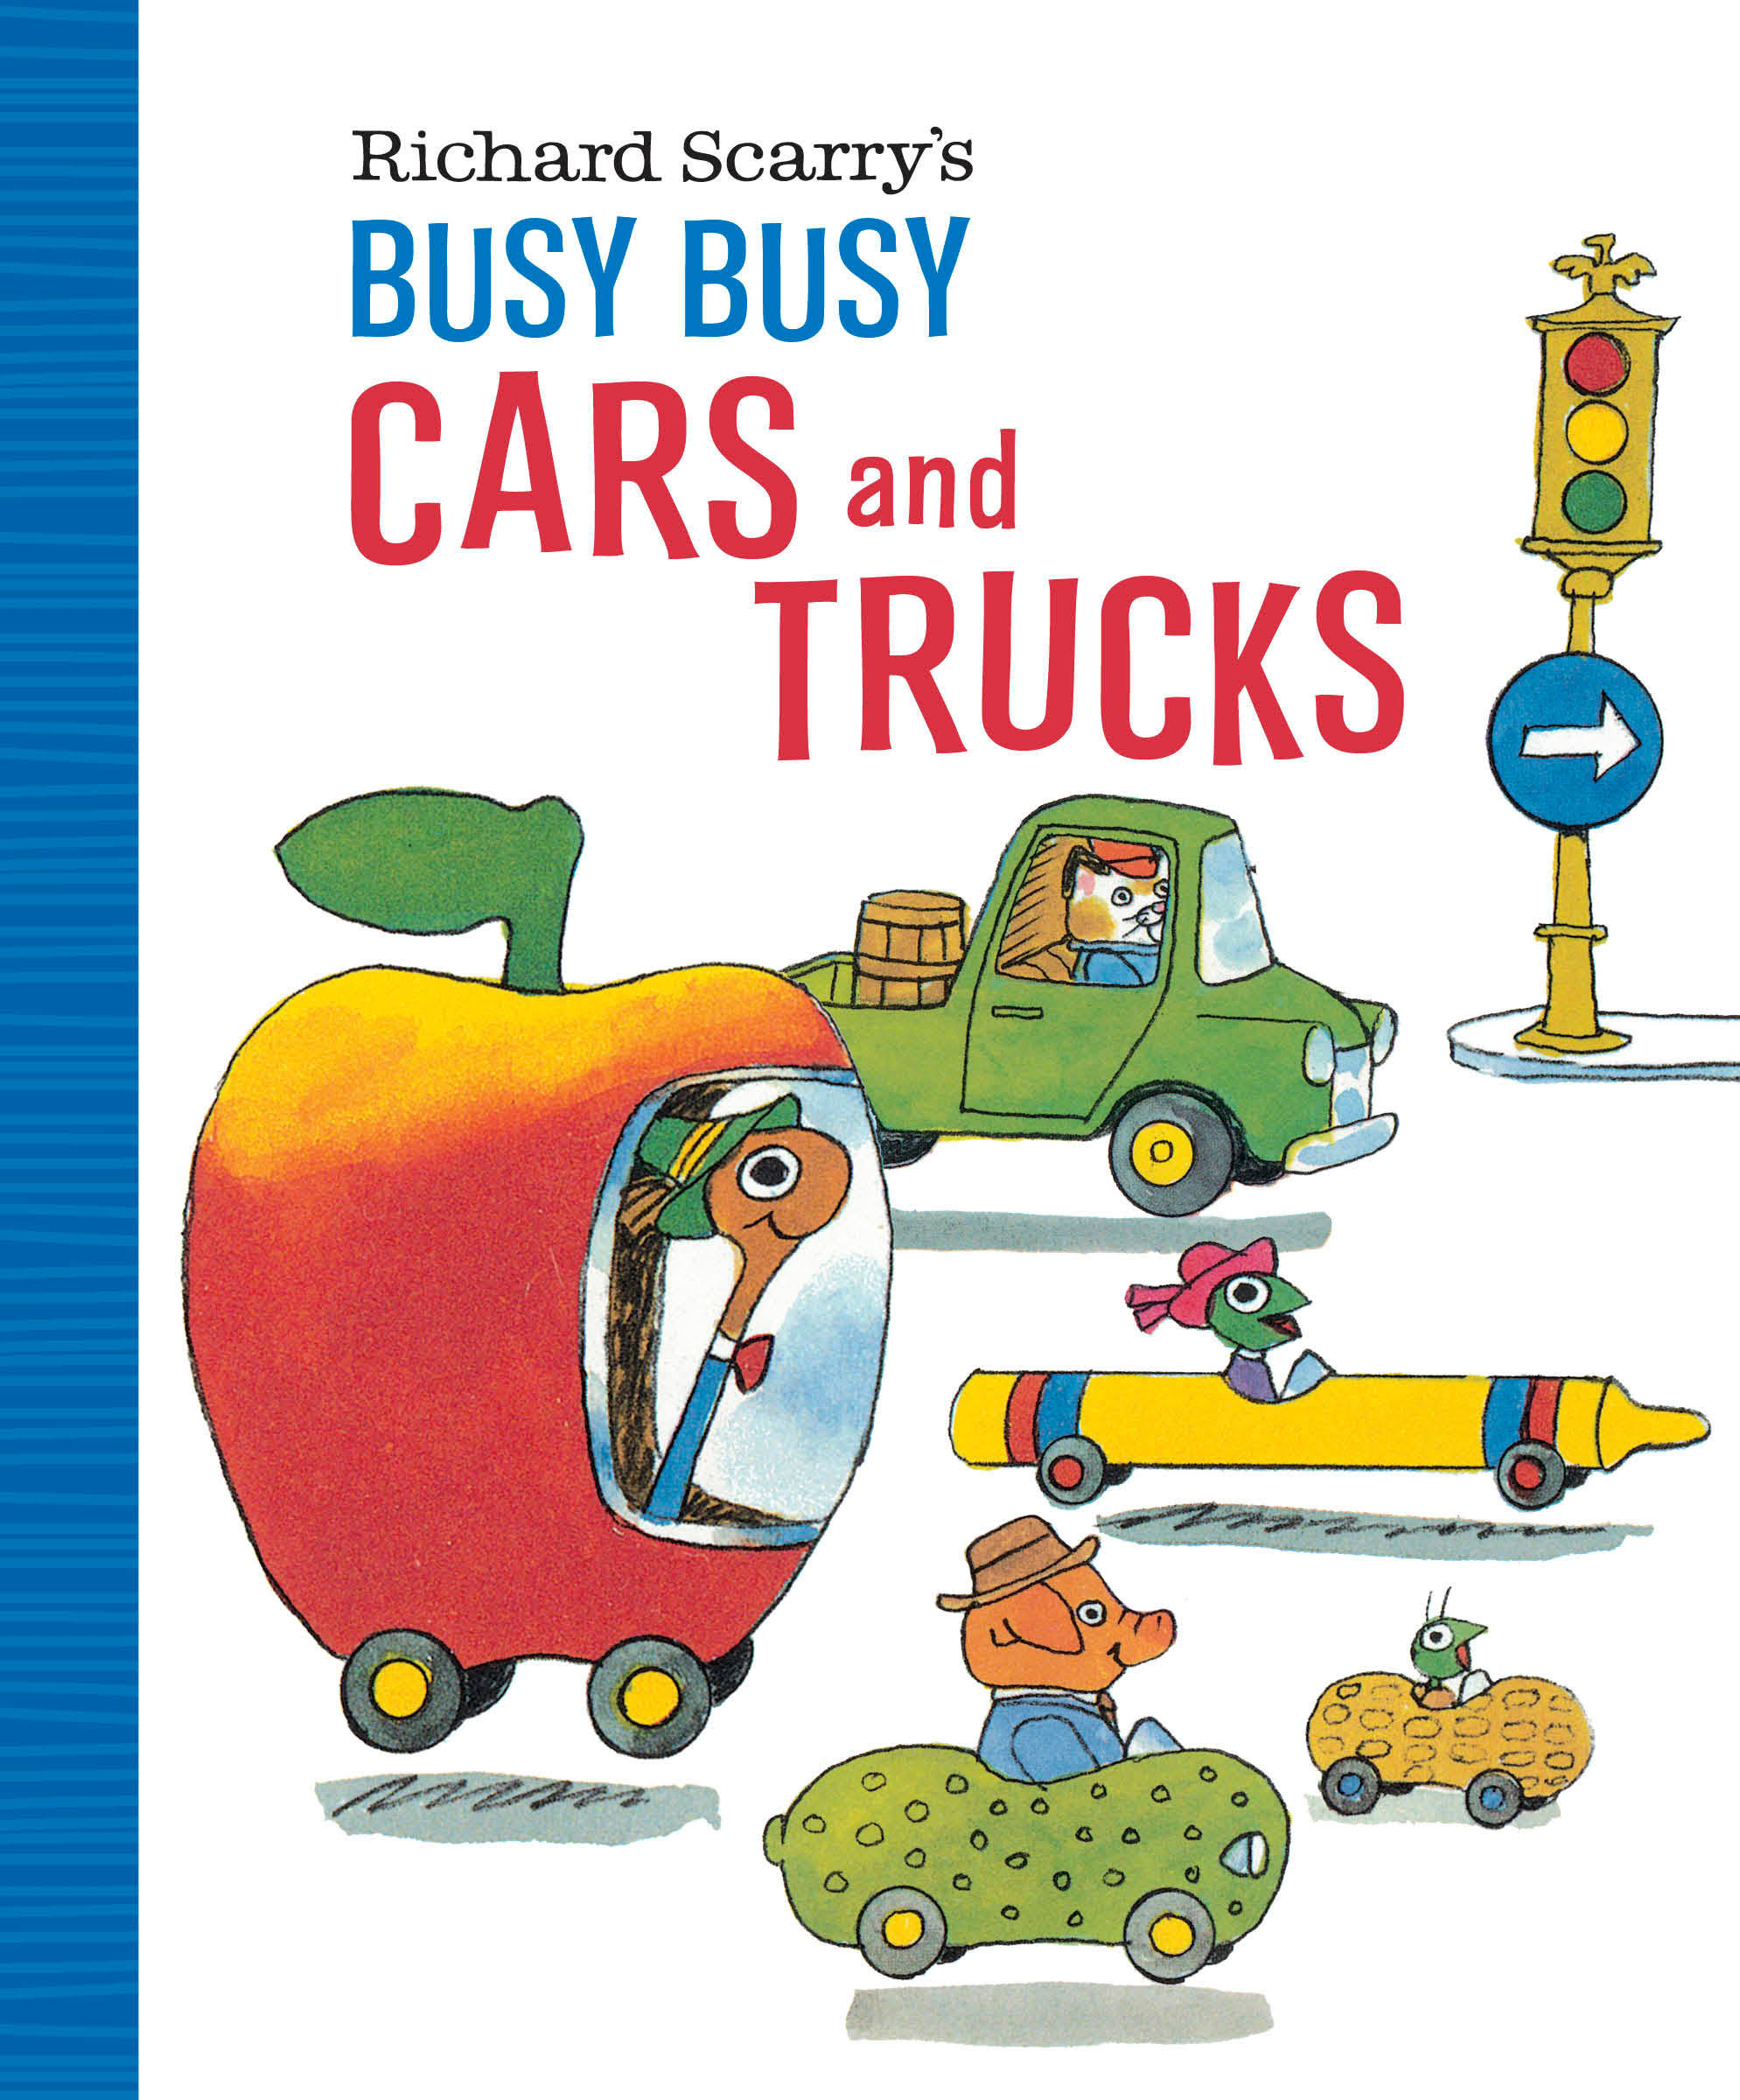 Richard Scarry's Busy Busy Cars and Trucks [Book]